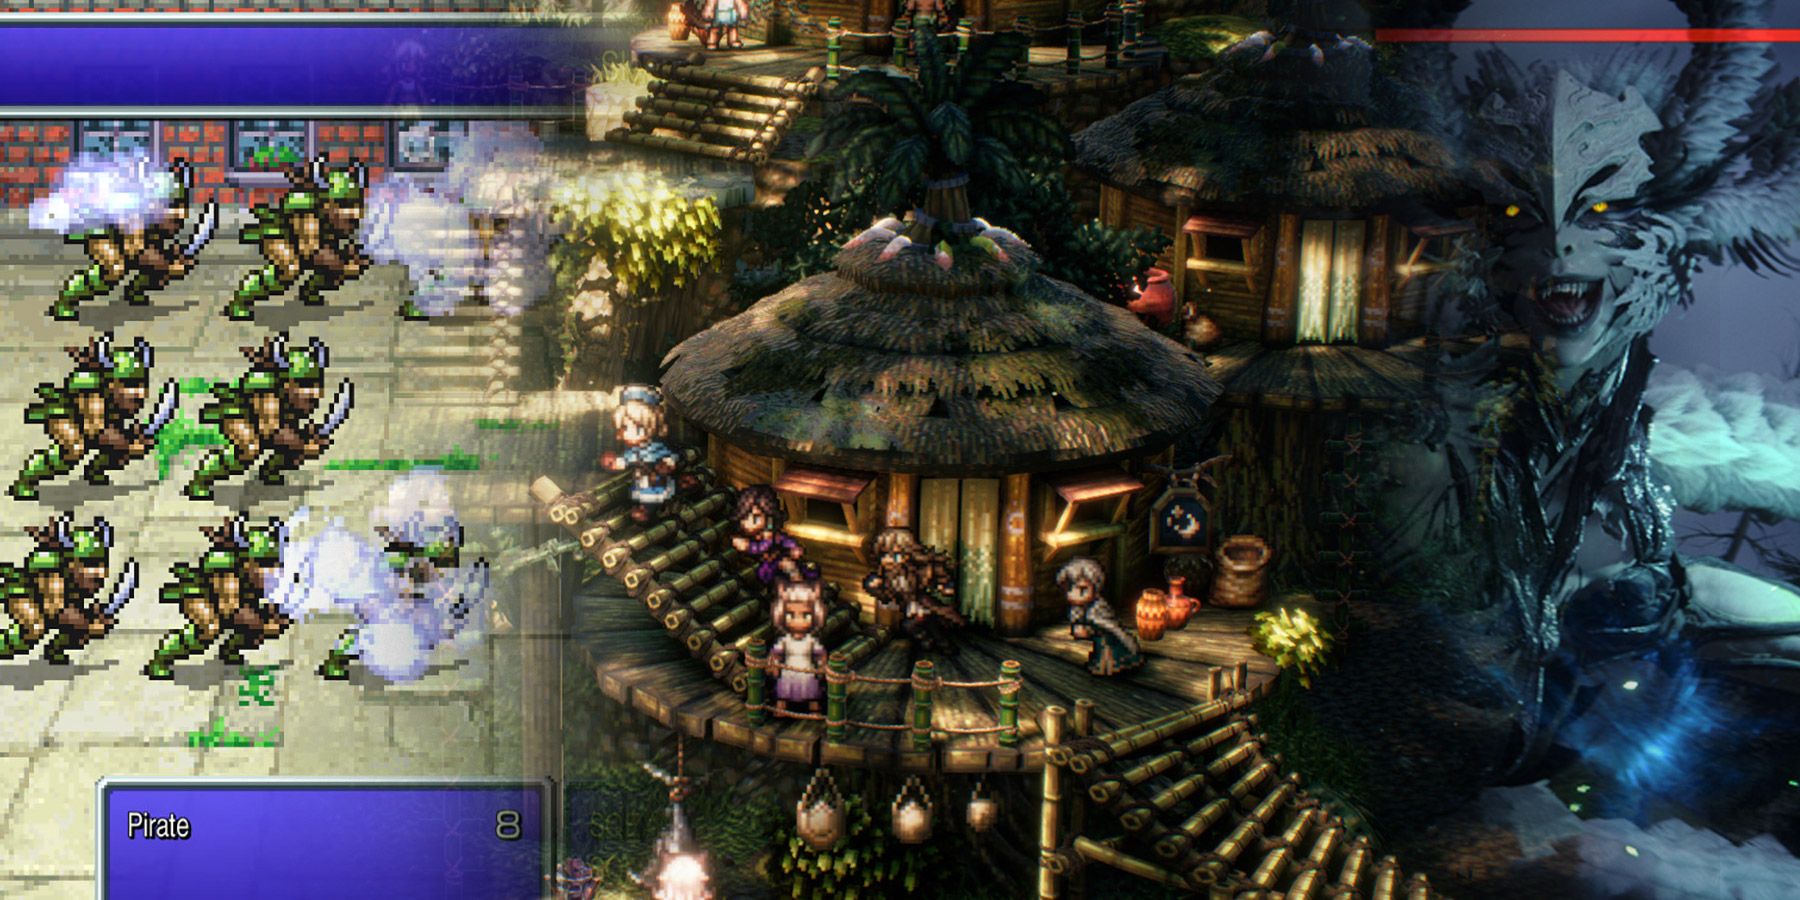 Octopath Traveler Preserves Square Enix RPG Traditions